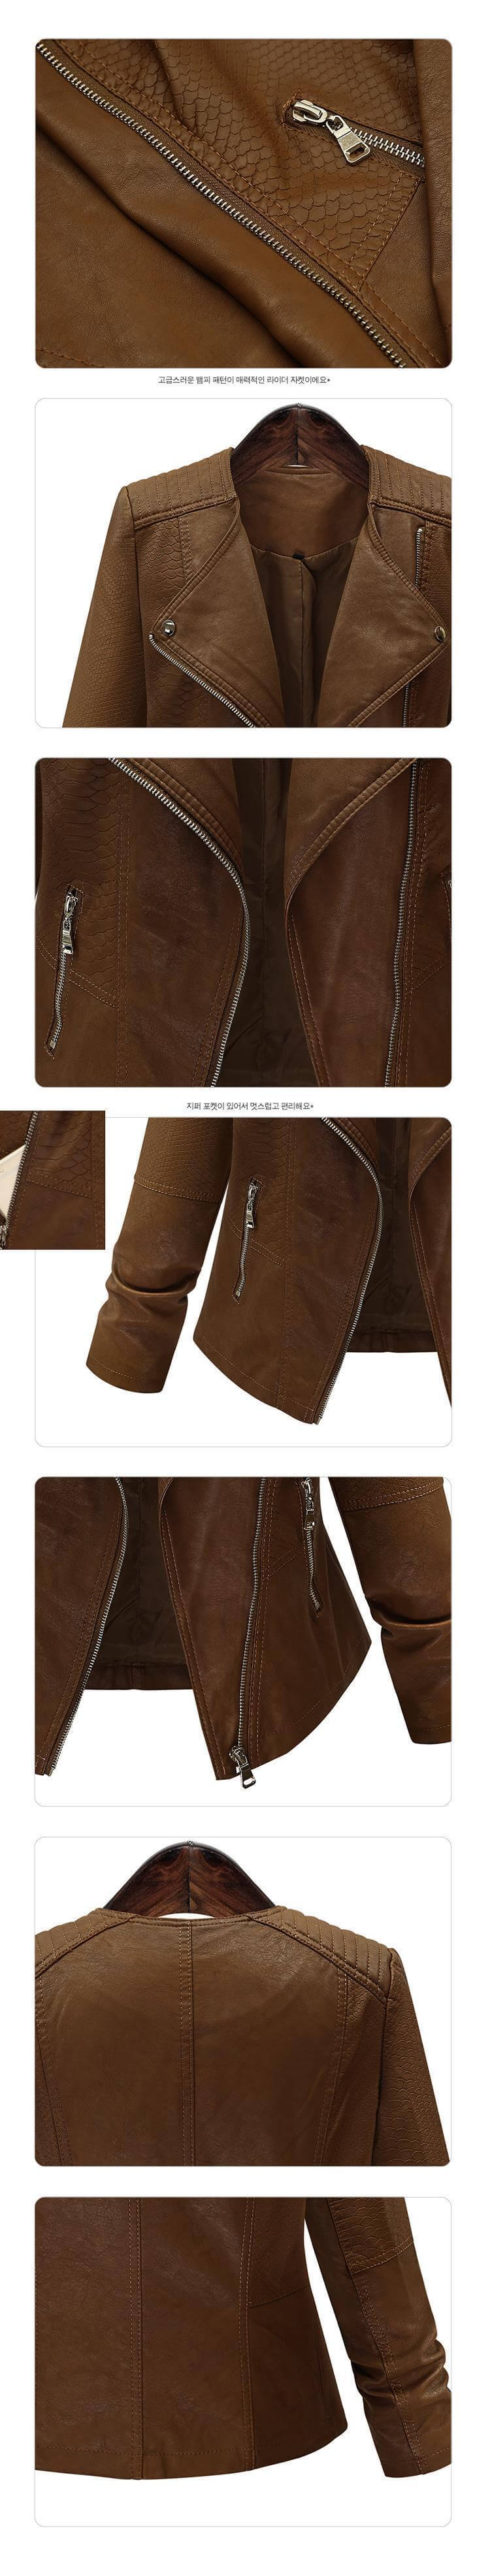 Achiewell Long Sleeve Leather Jacket 2 Scaled